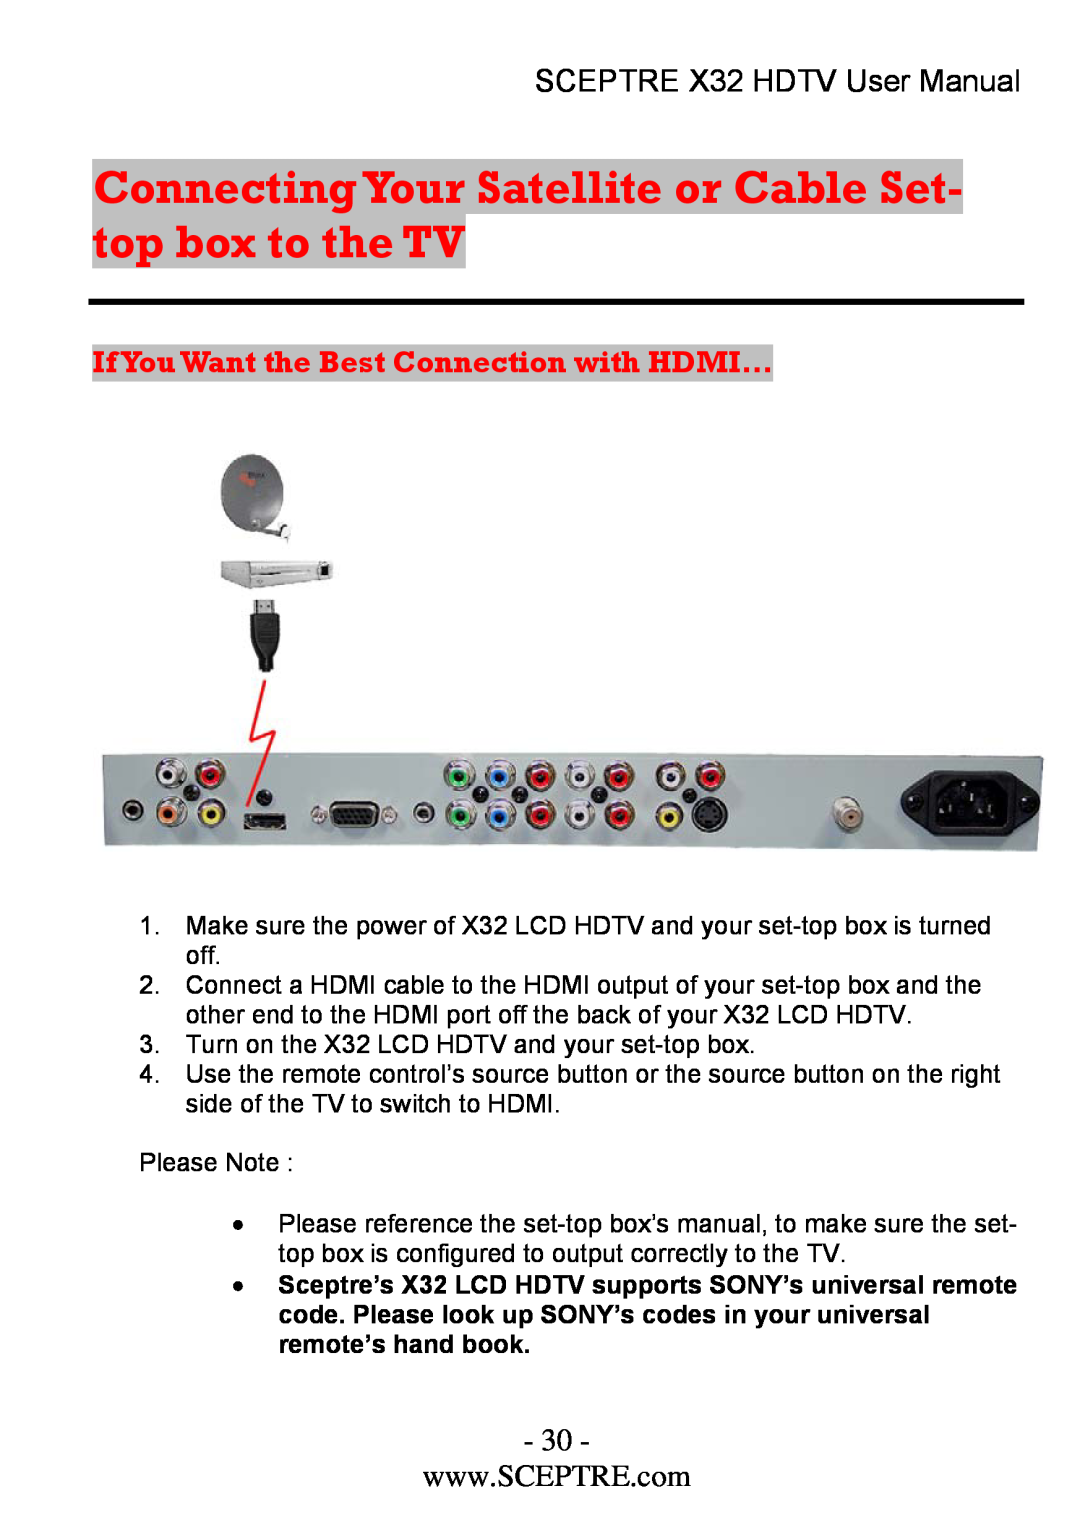 Sceptre Technologies x32 Connecting Your Satellite or Cable Set- top box to the TV, SCEPTRE X32 HDTV User Manual 